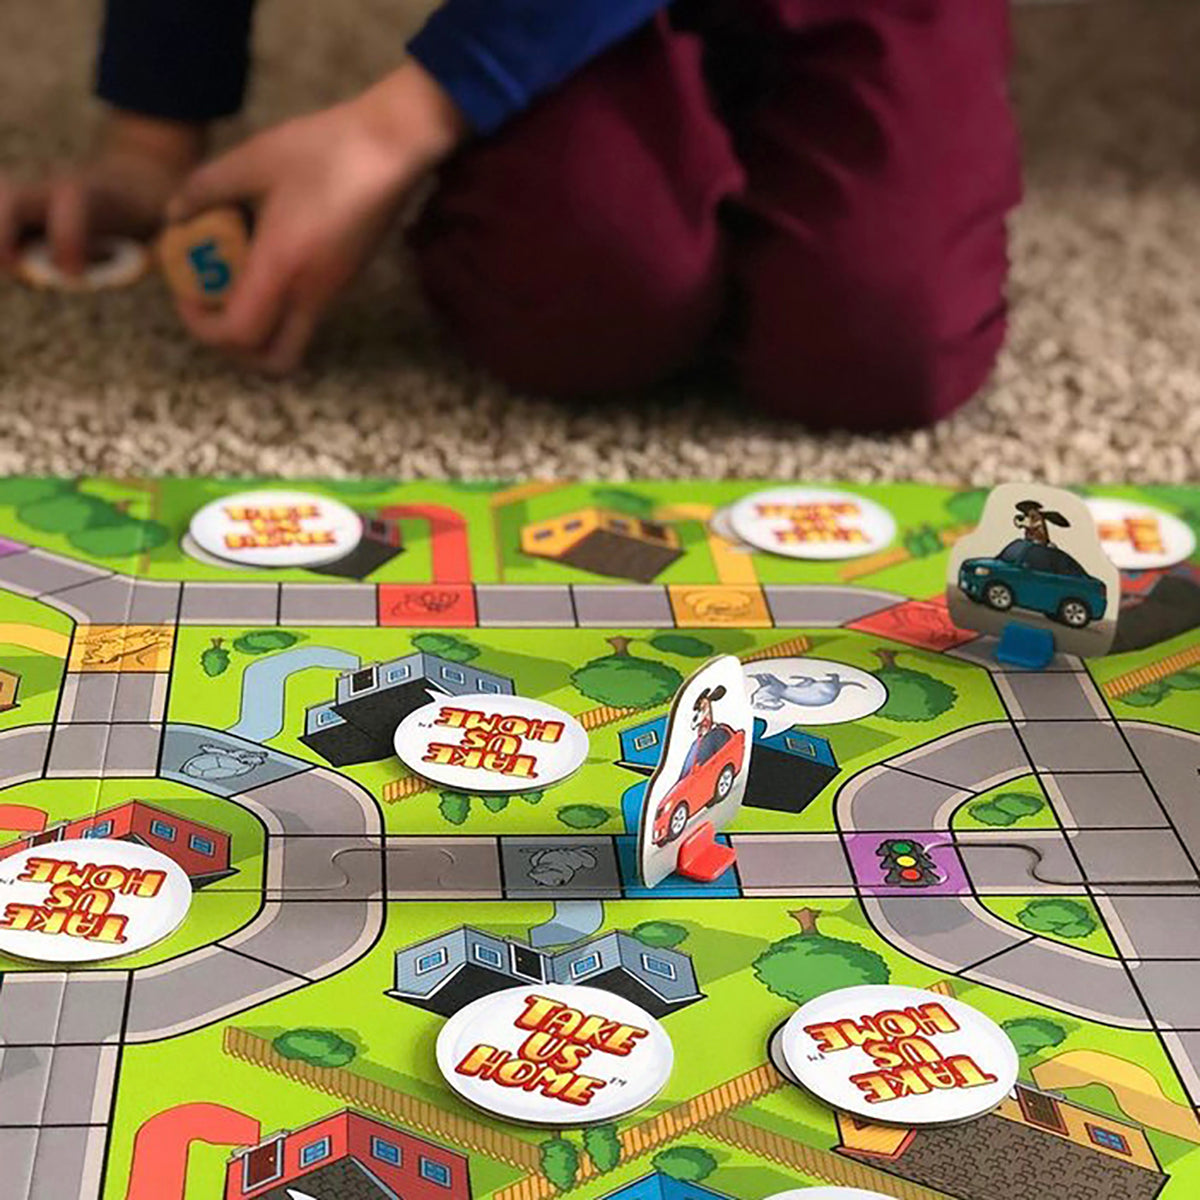 Take Us Home by SimplyFun is a fun pet game focusing on counting and matching for ages 5 and up.